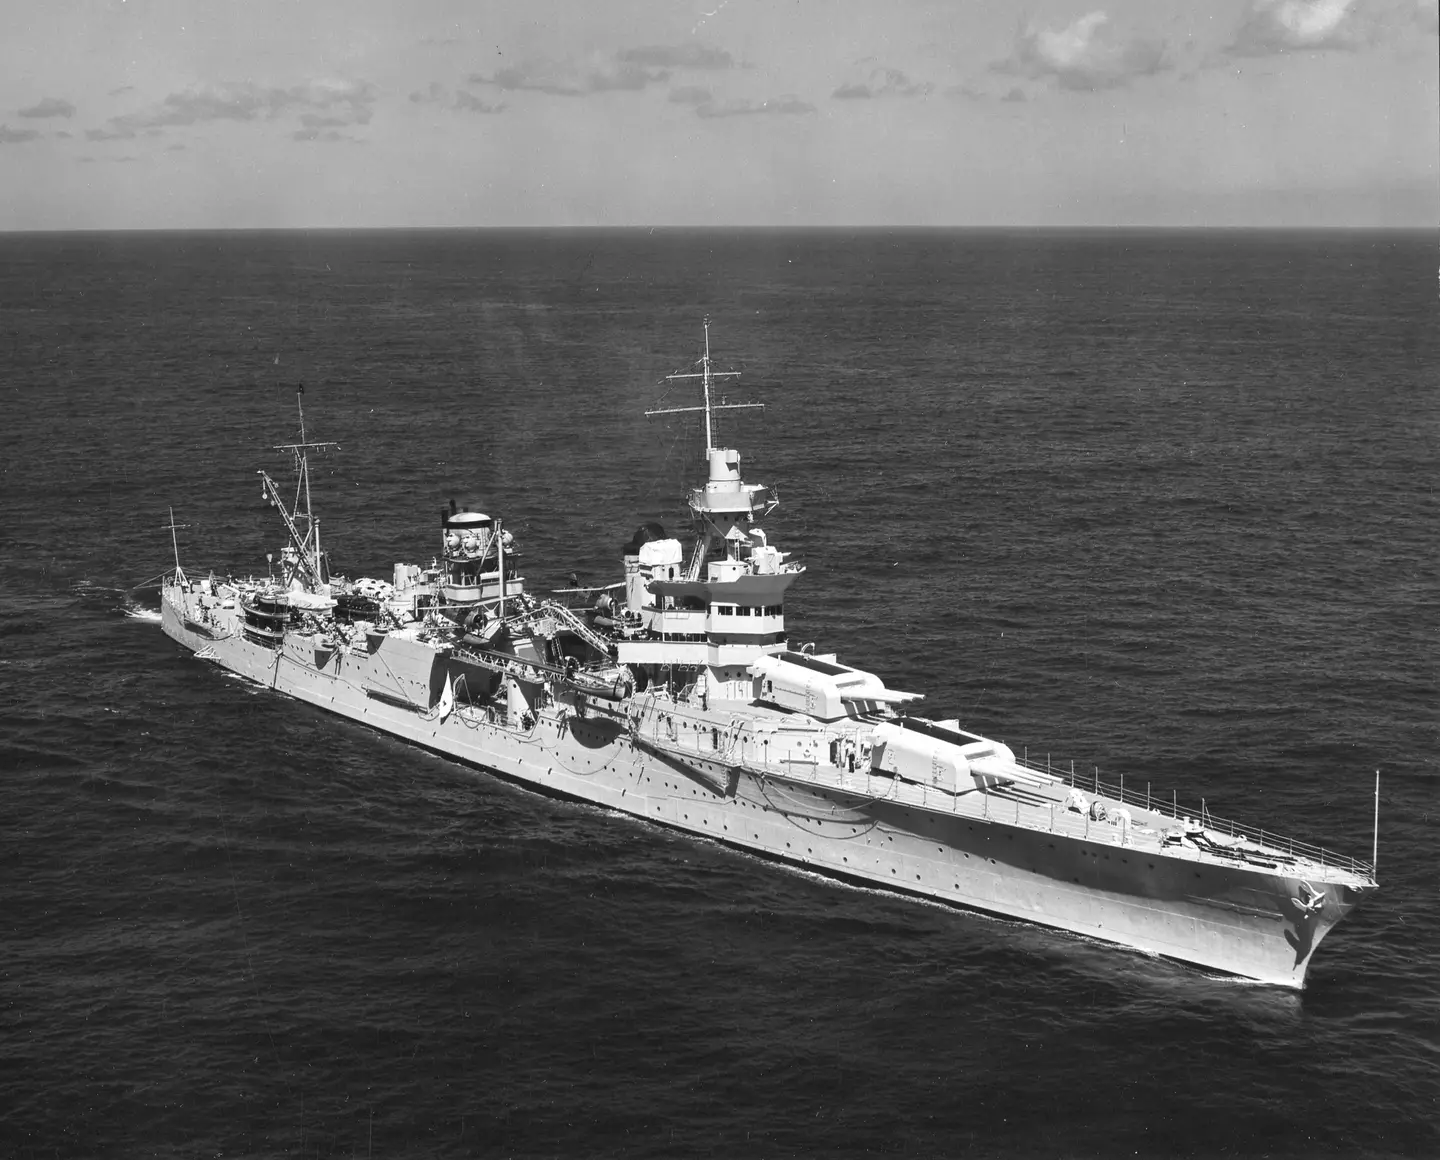 The USS Indianapolis, a heavy cruiser which was sunk in 1945 after delivering uranium for the 'Little Boy' nuclear bomb.